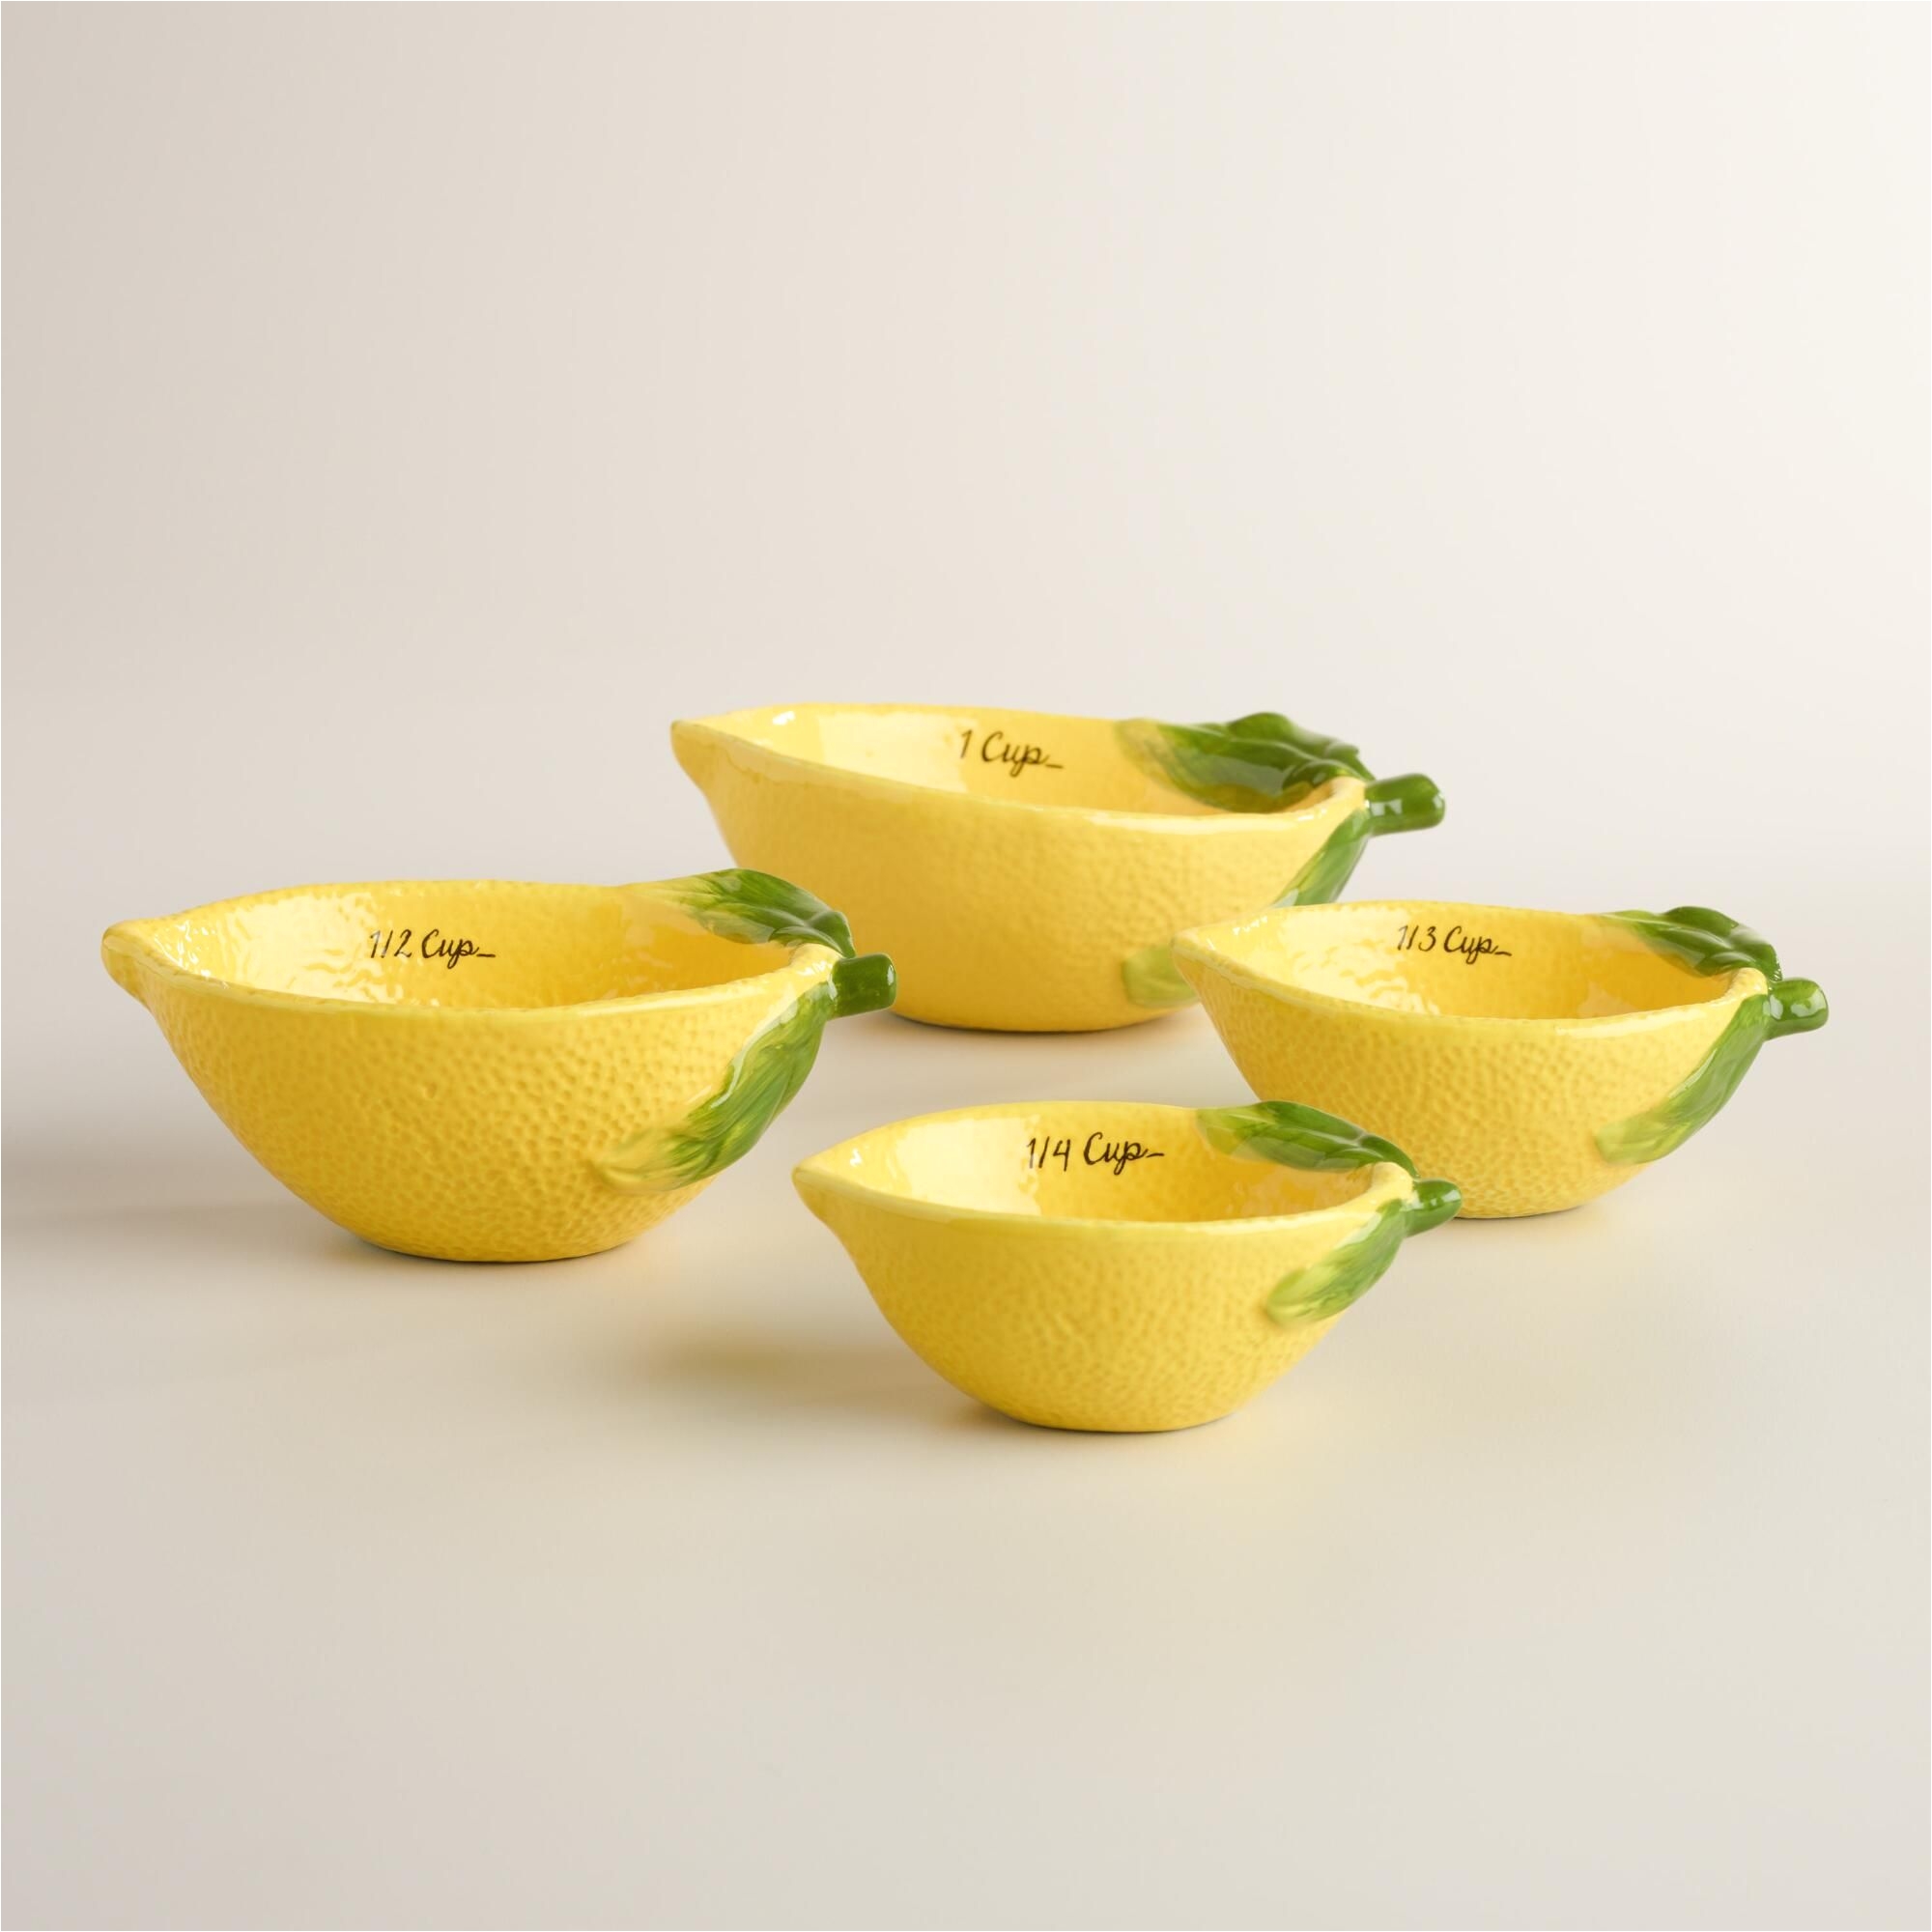 Decorative Ceramic Measuring Cups and Spoons Crafted Of Ceramic with A Fruit Like Texture Our Exclusive